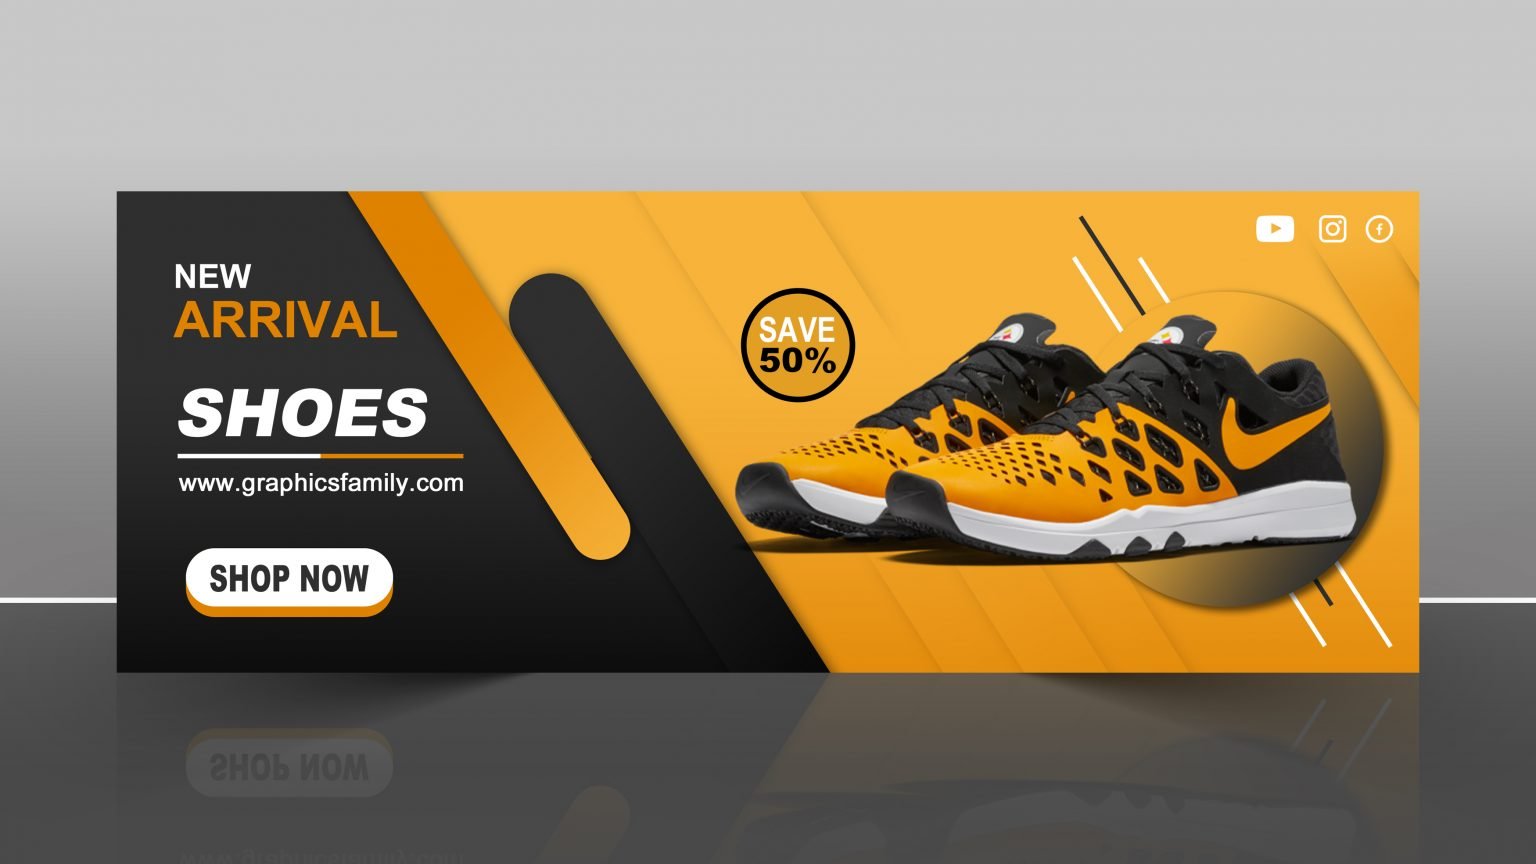 Facebook Shoes Sale Timeline Cover Banner Free PSD 1536x864 